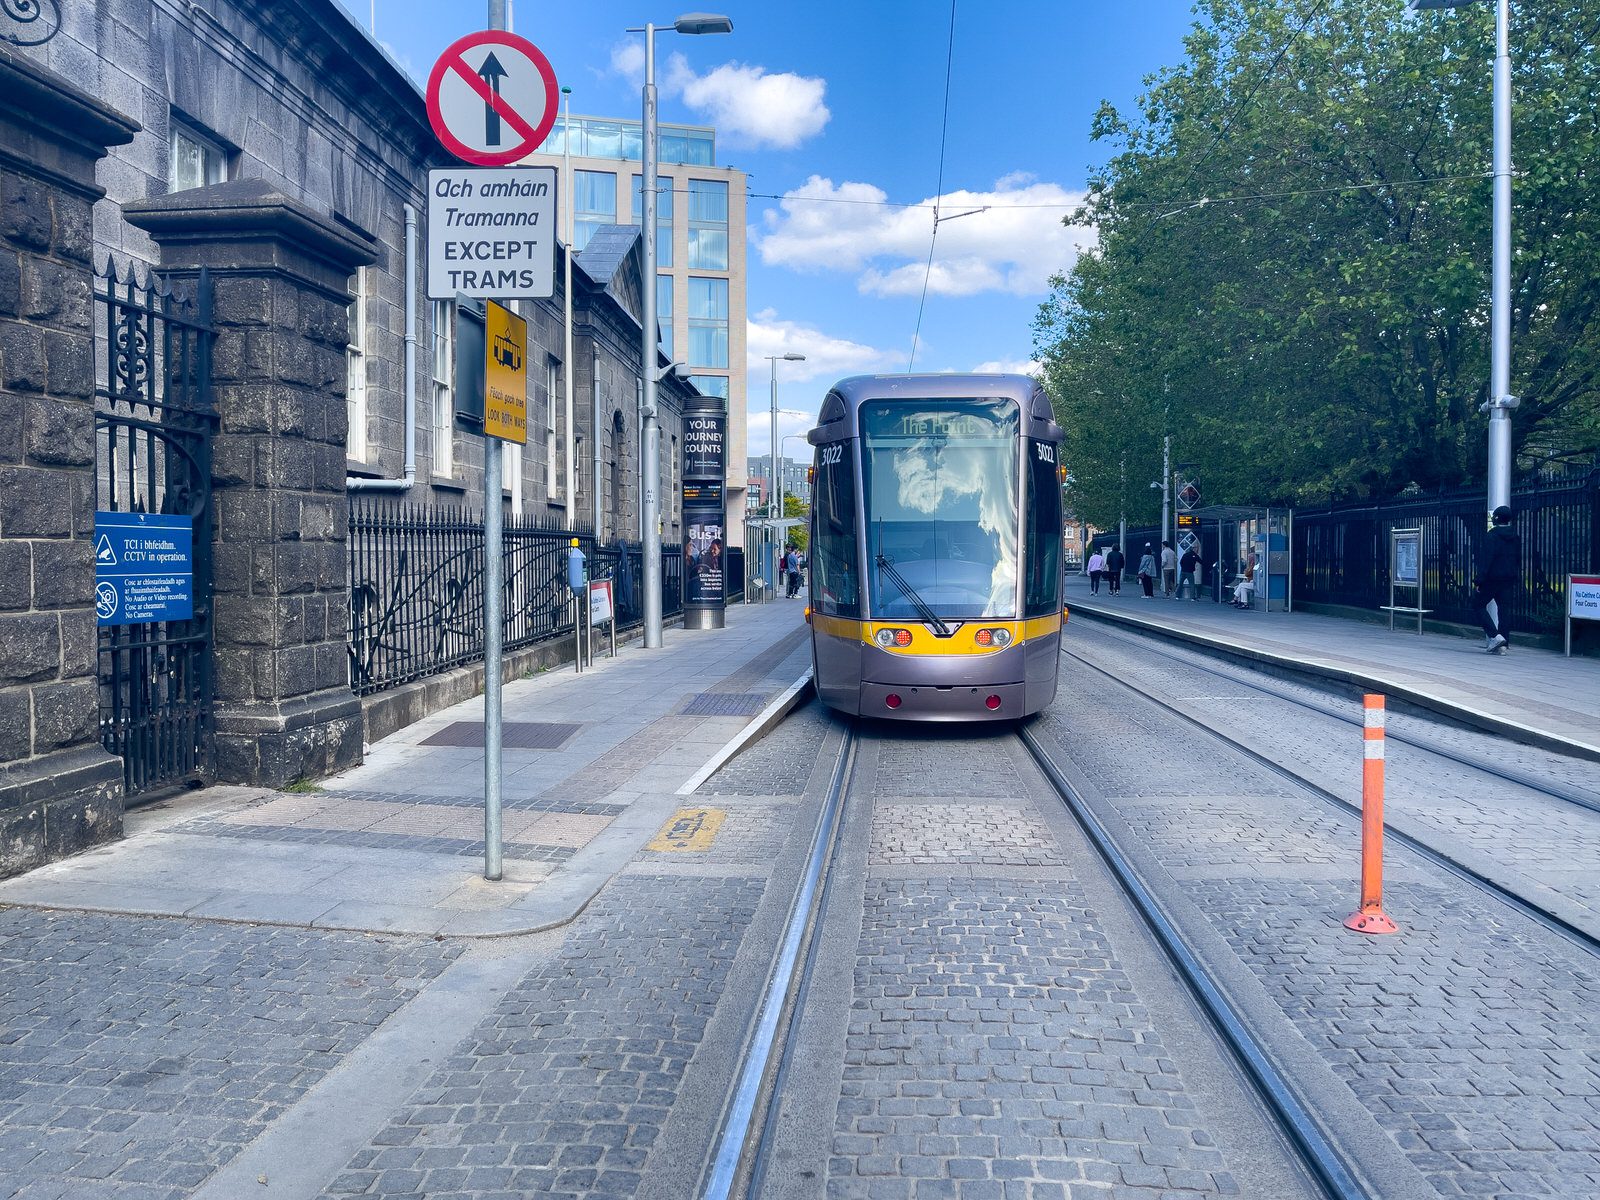 THE LUAS FOUR COURTS TRAM STOP [THERE IS MUCH TO BE SEEN HERE]-234119-1